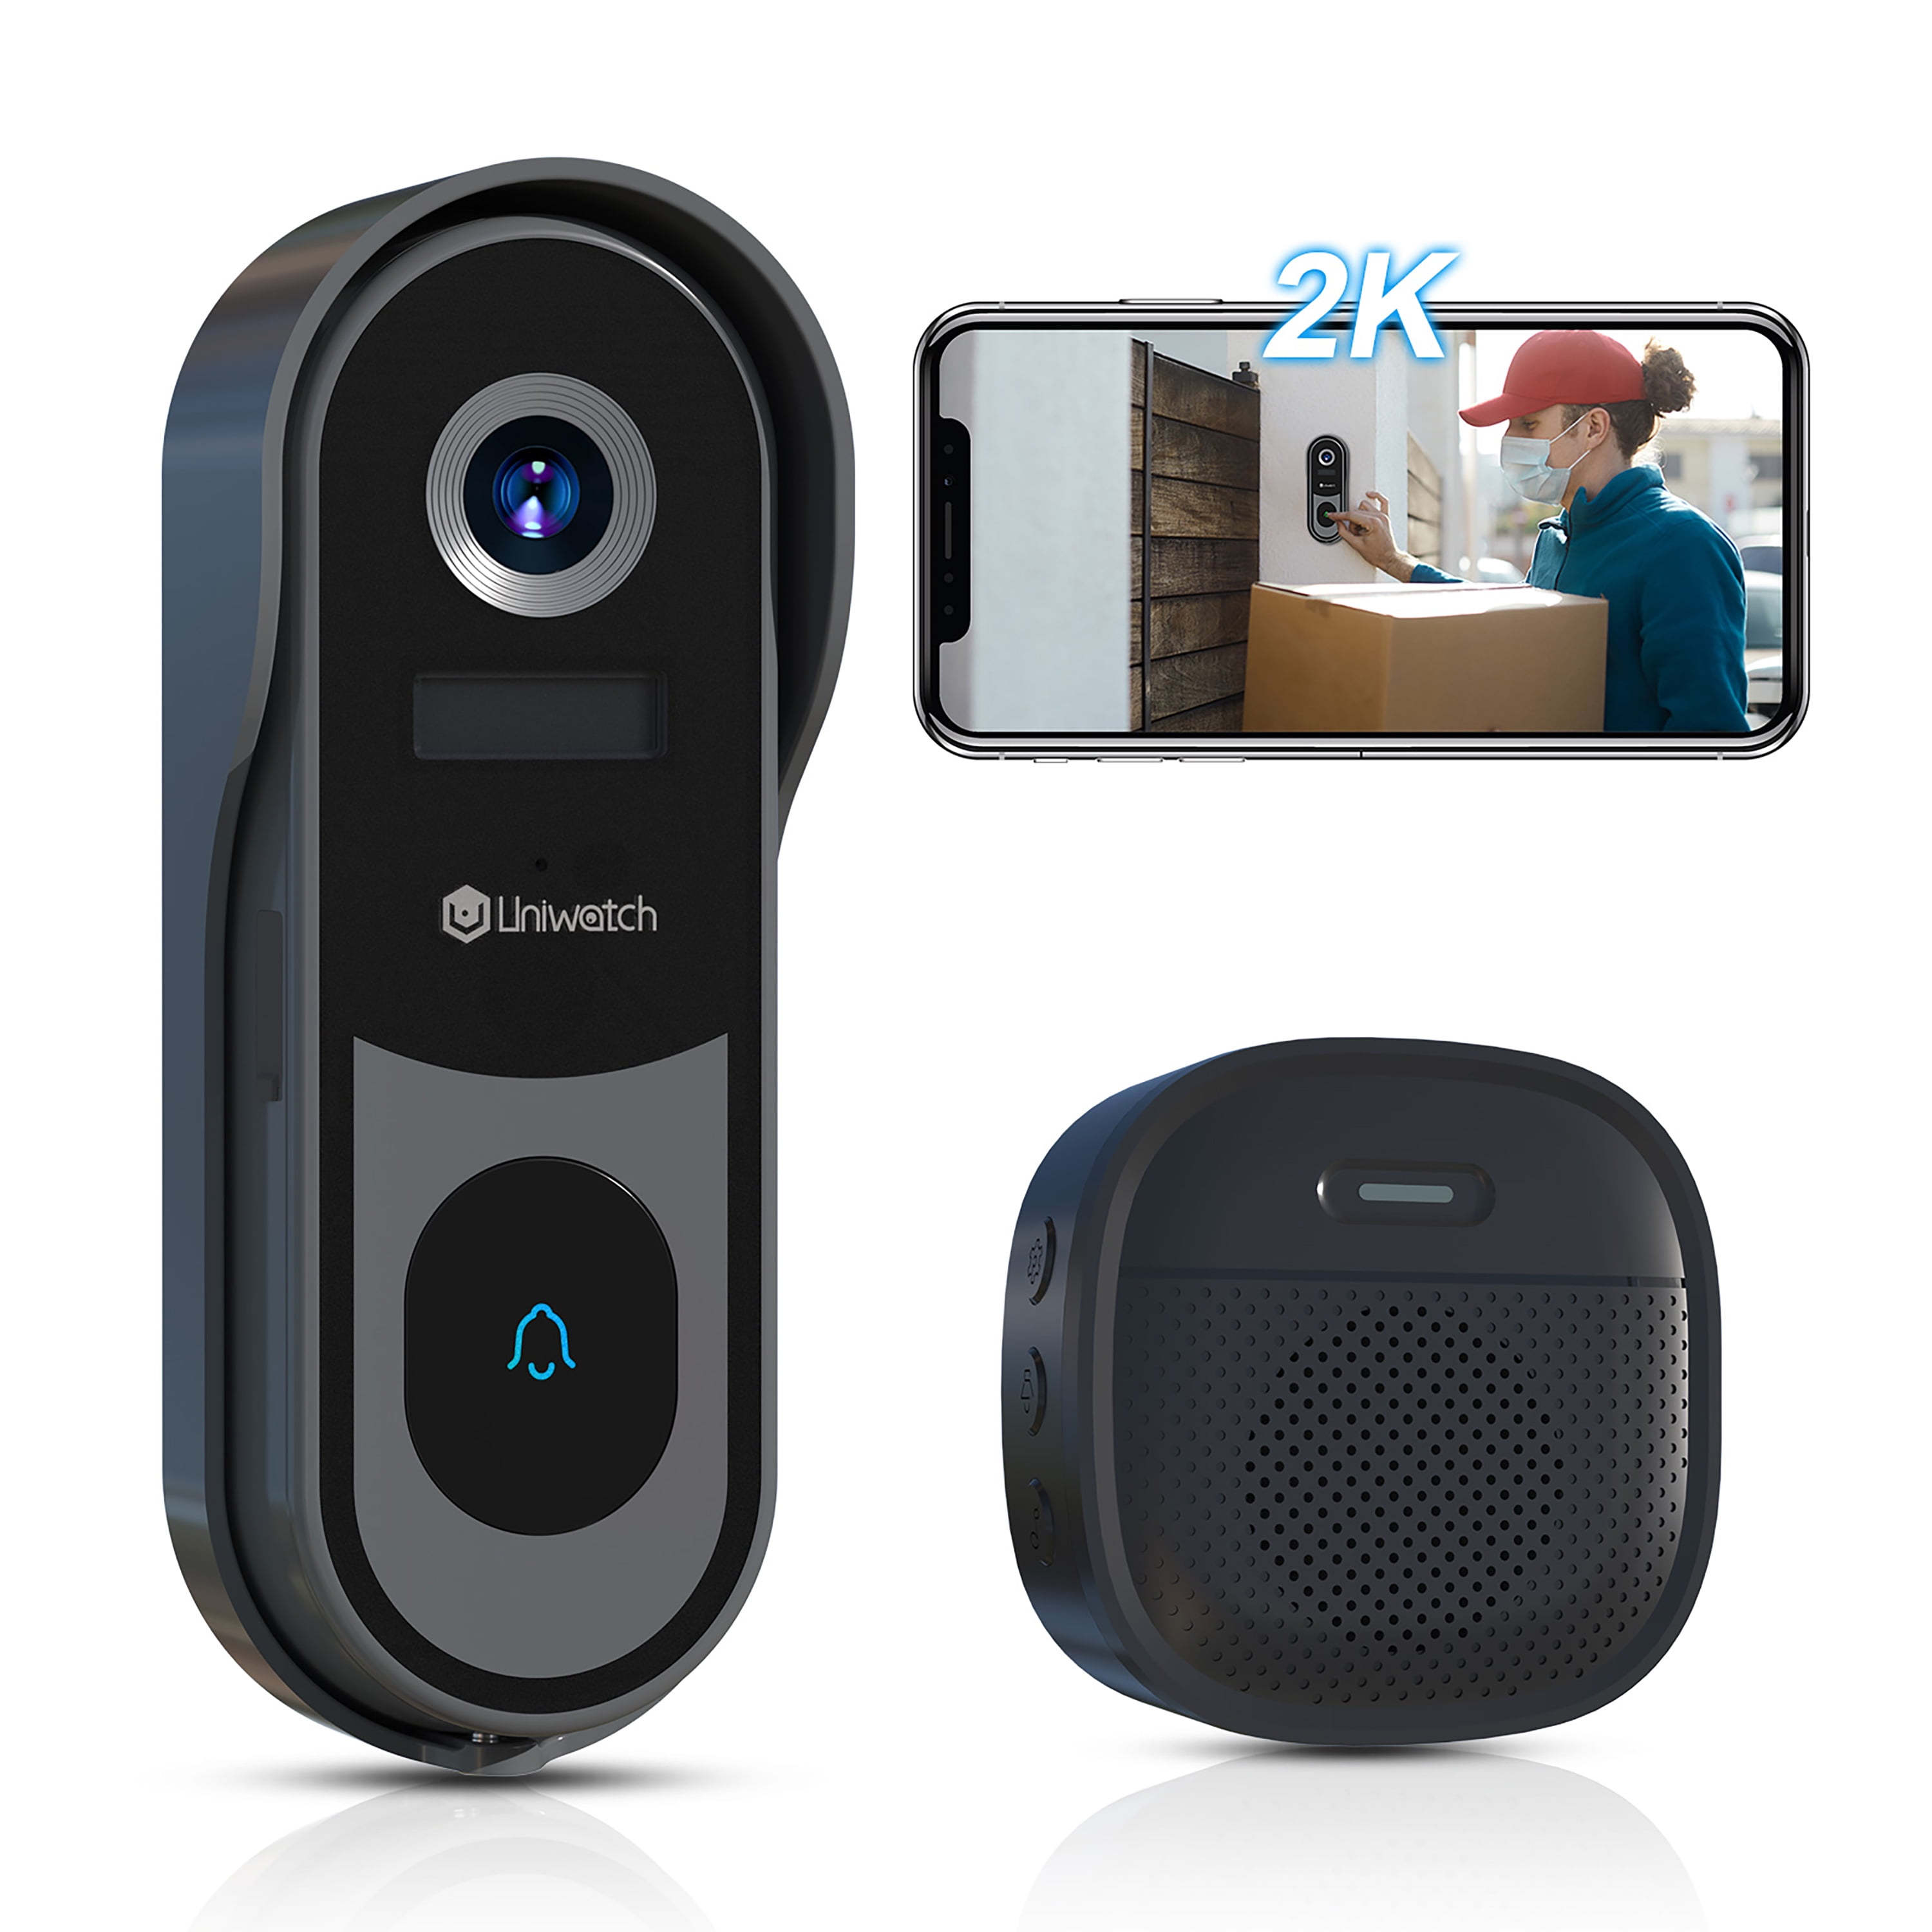  ieGeek 2K Doorbell Camera Wireless - Video Doorbell with Chime  Ringer, Smart Wifi Doorbell AI & PIR Motion Detection, 2 Way Audio, Voice  Changer, SD Card Storage with No Subscription, Works